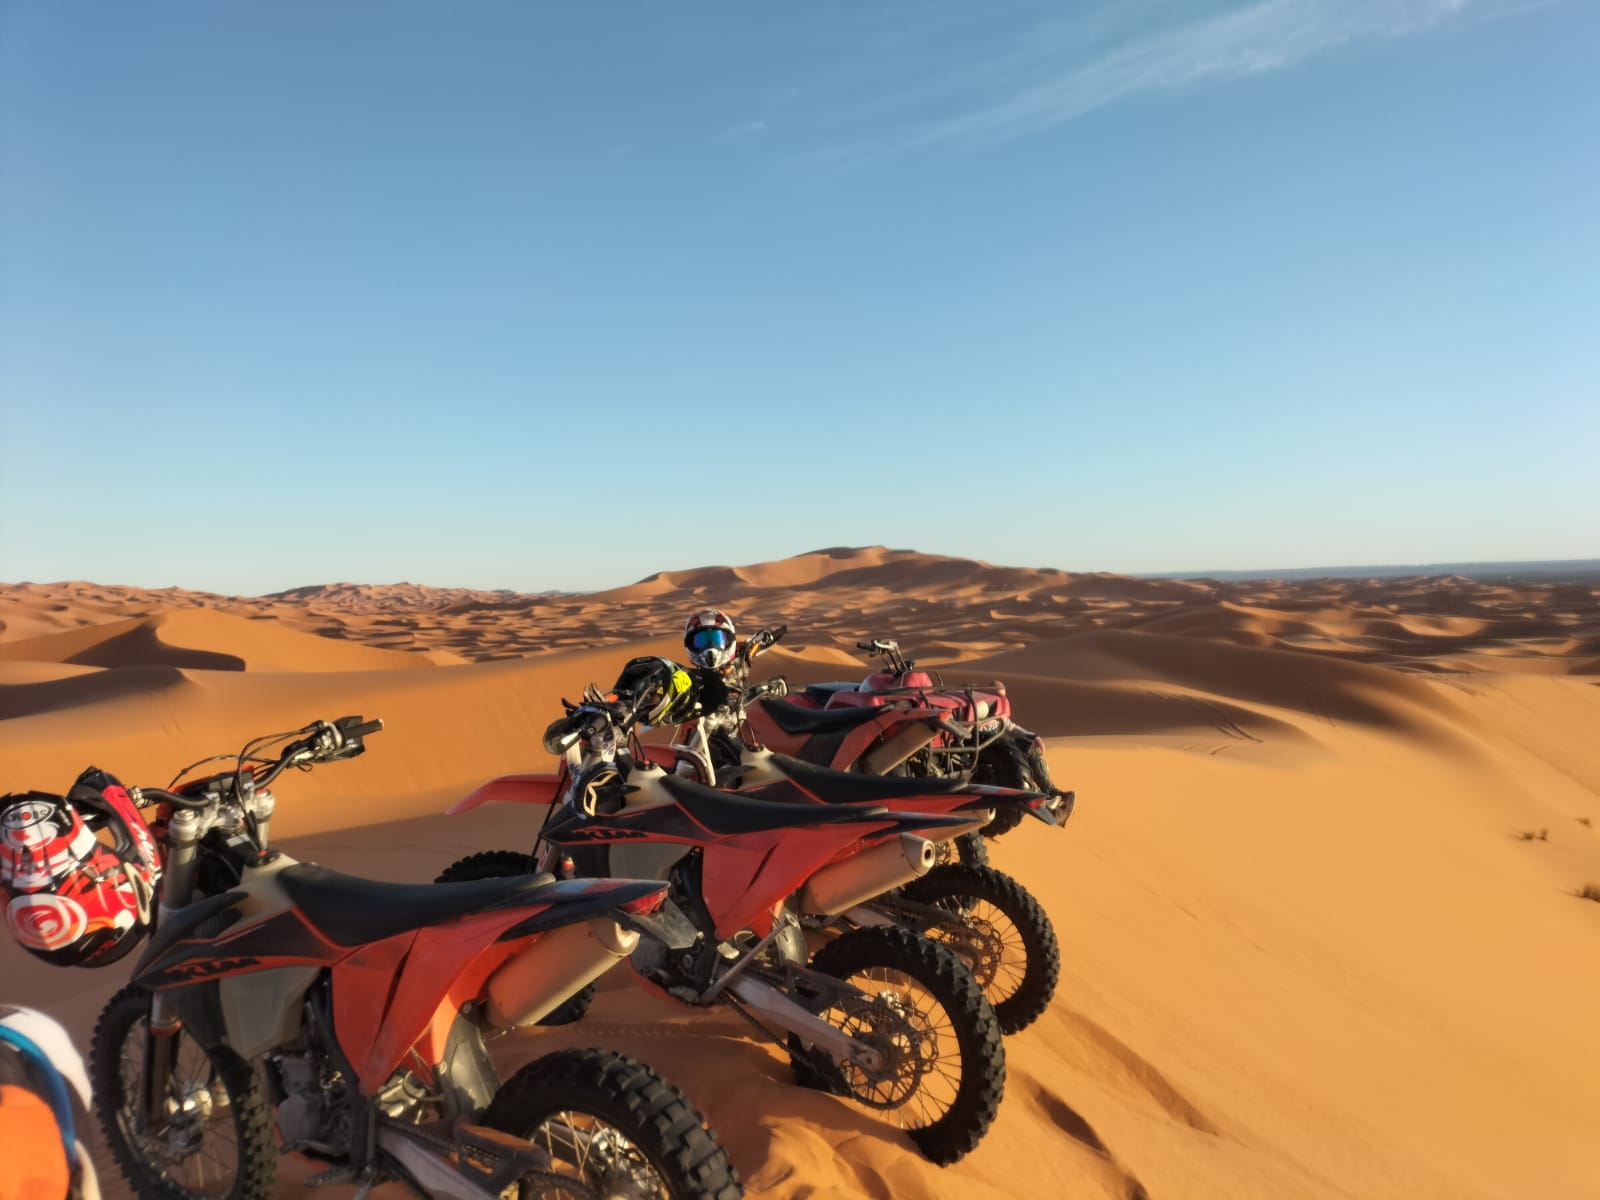 Discover our incredible motorcycle adventures in Morocco